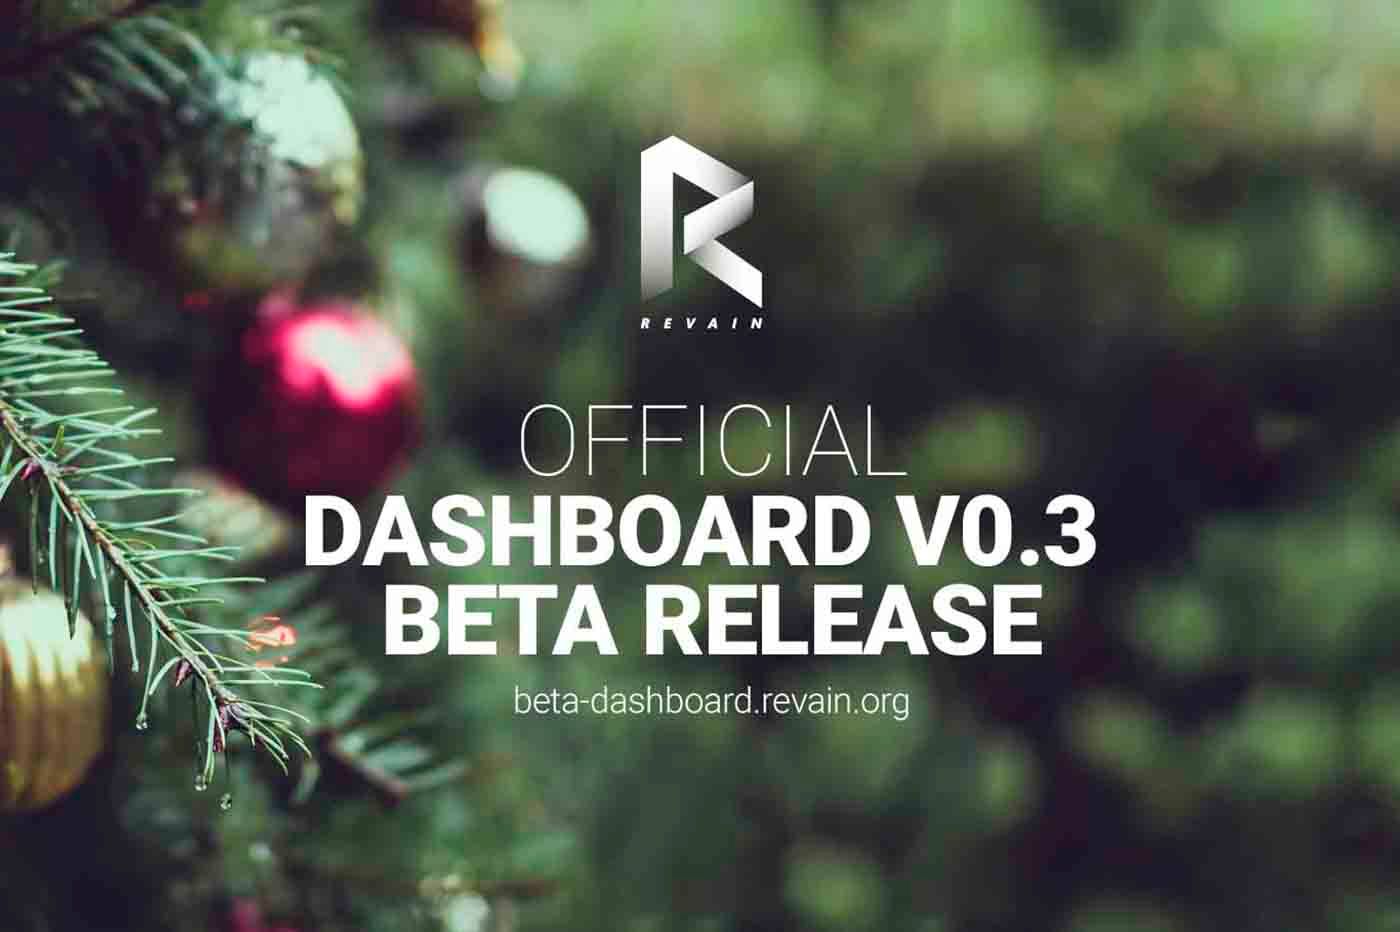 Article The Revain blog birth and beta v0.3